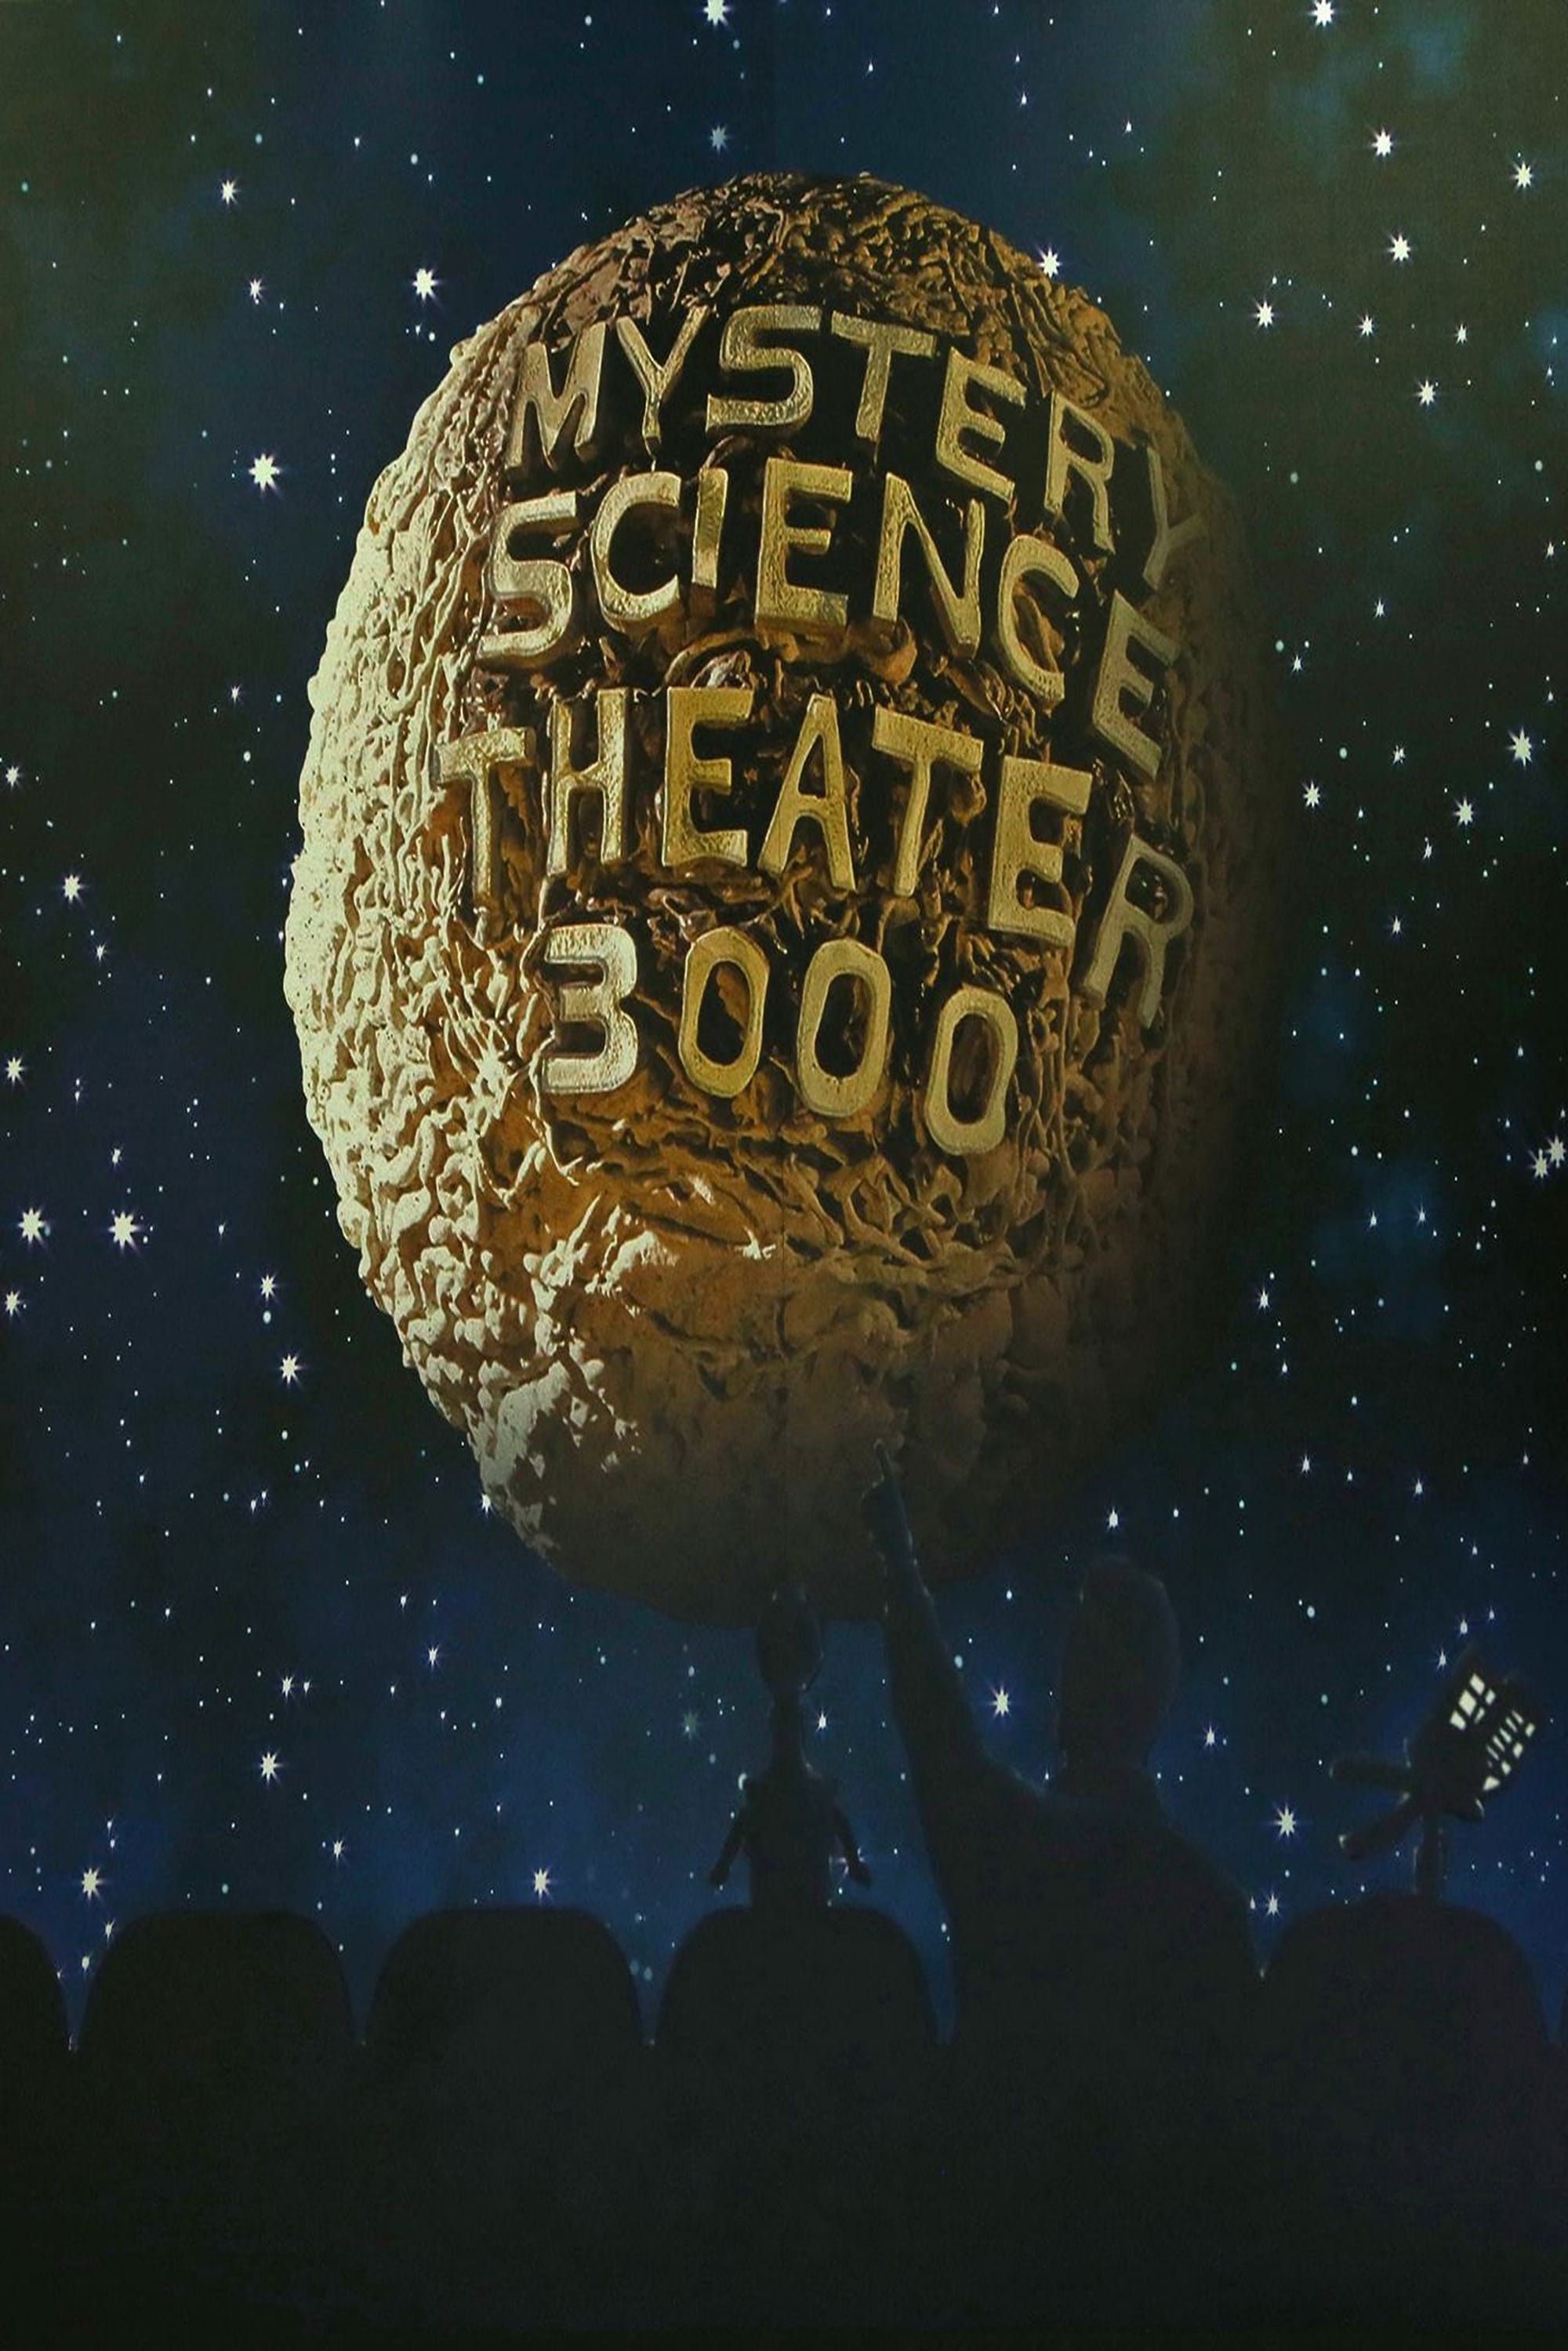 Mystery Science Theater 3000: Gamera vs. Guiron